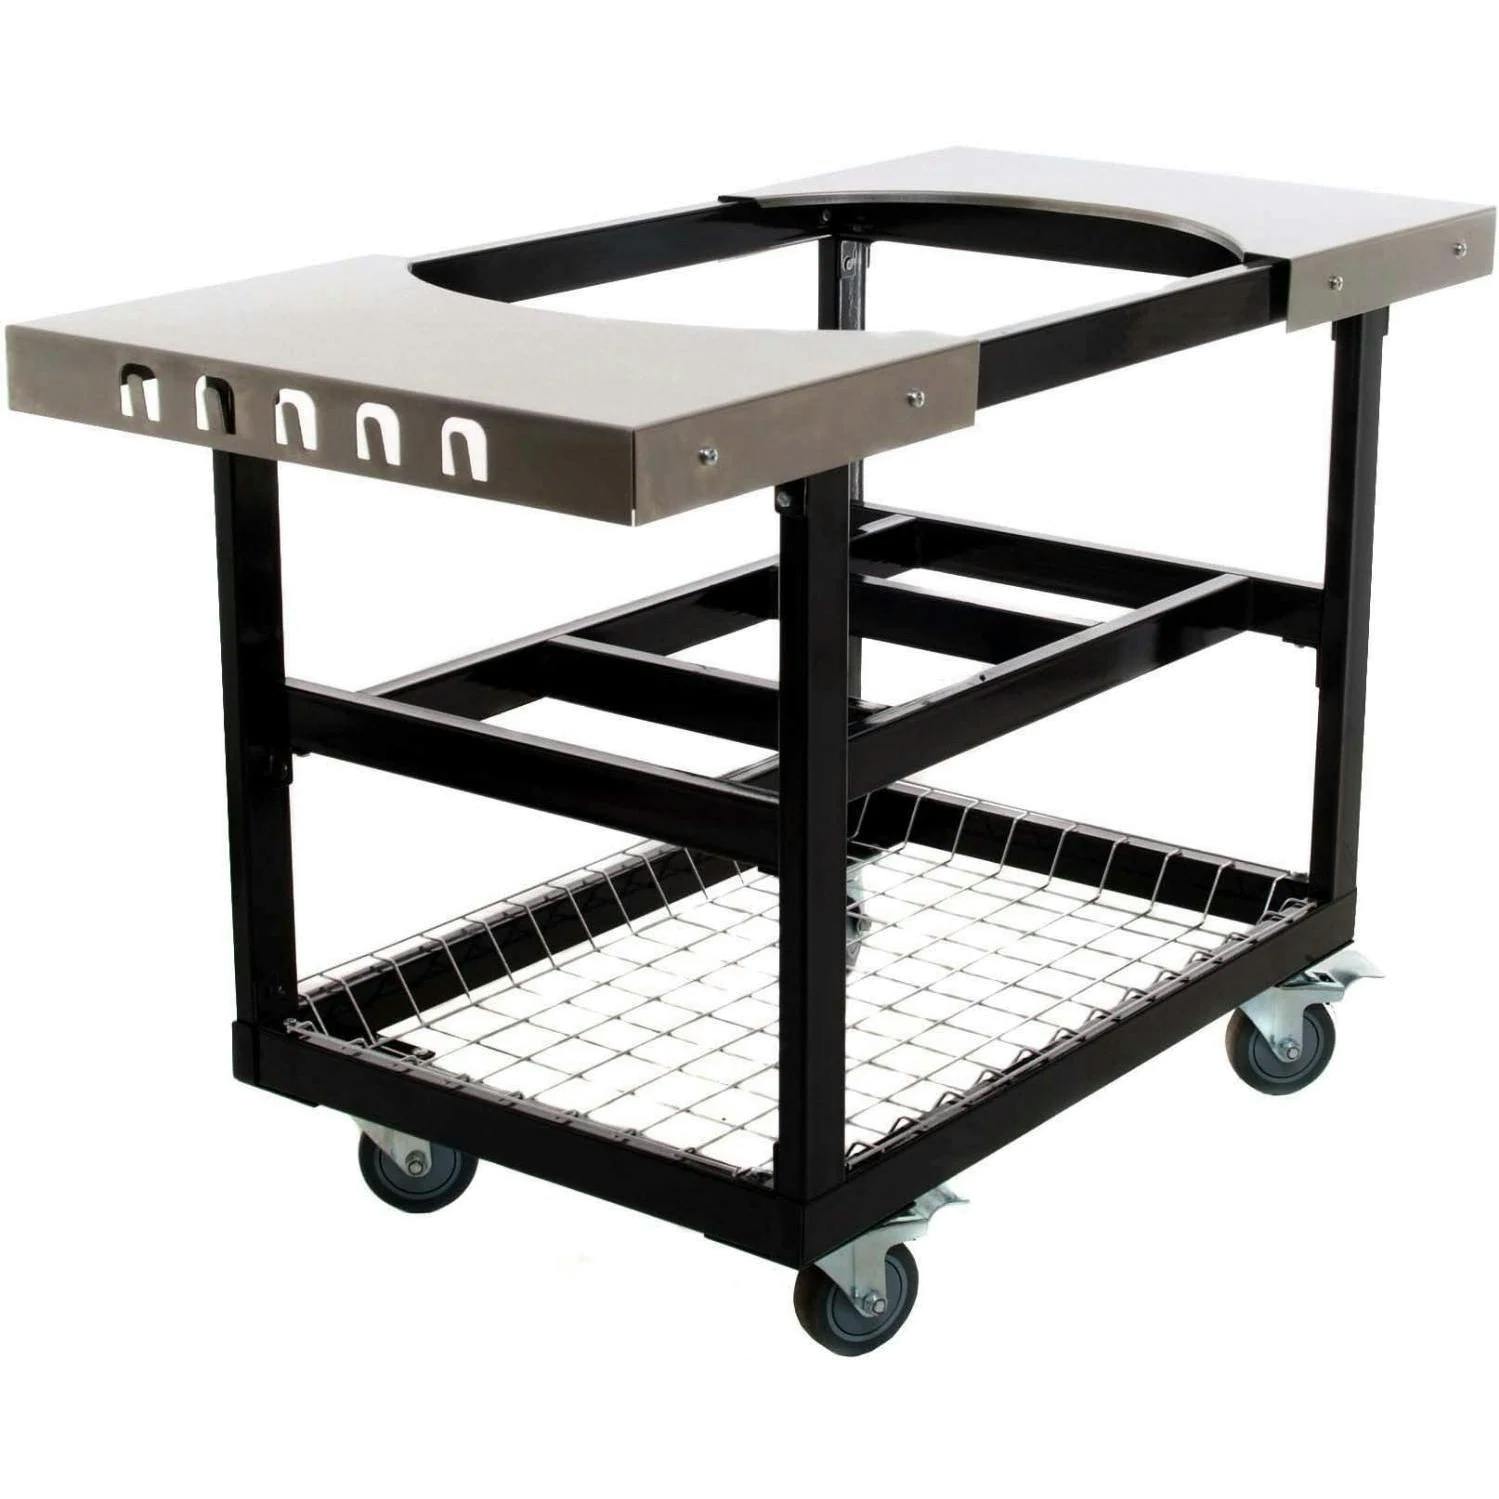 Primo Steel Cart with Stainless Steel Side Tables for Oval Junior